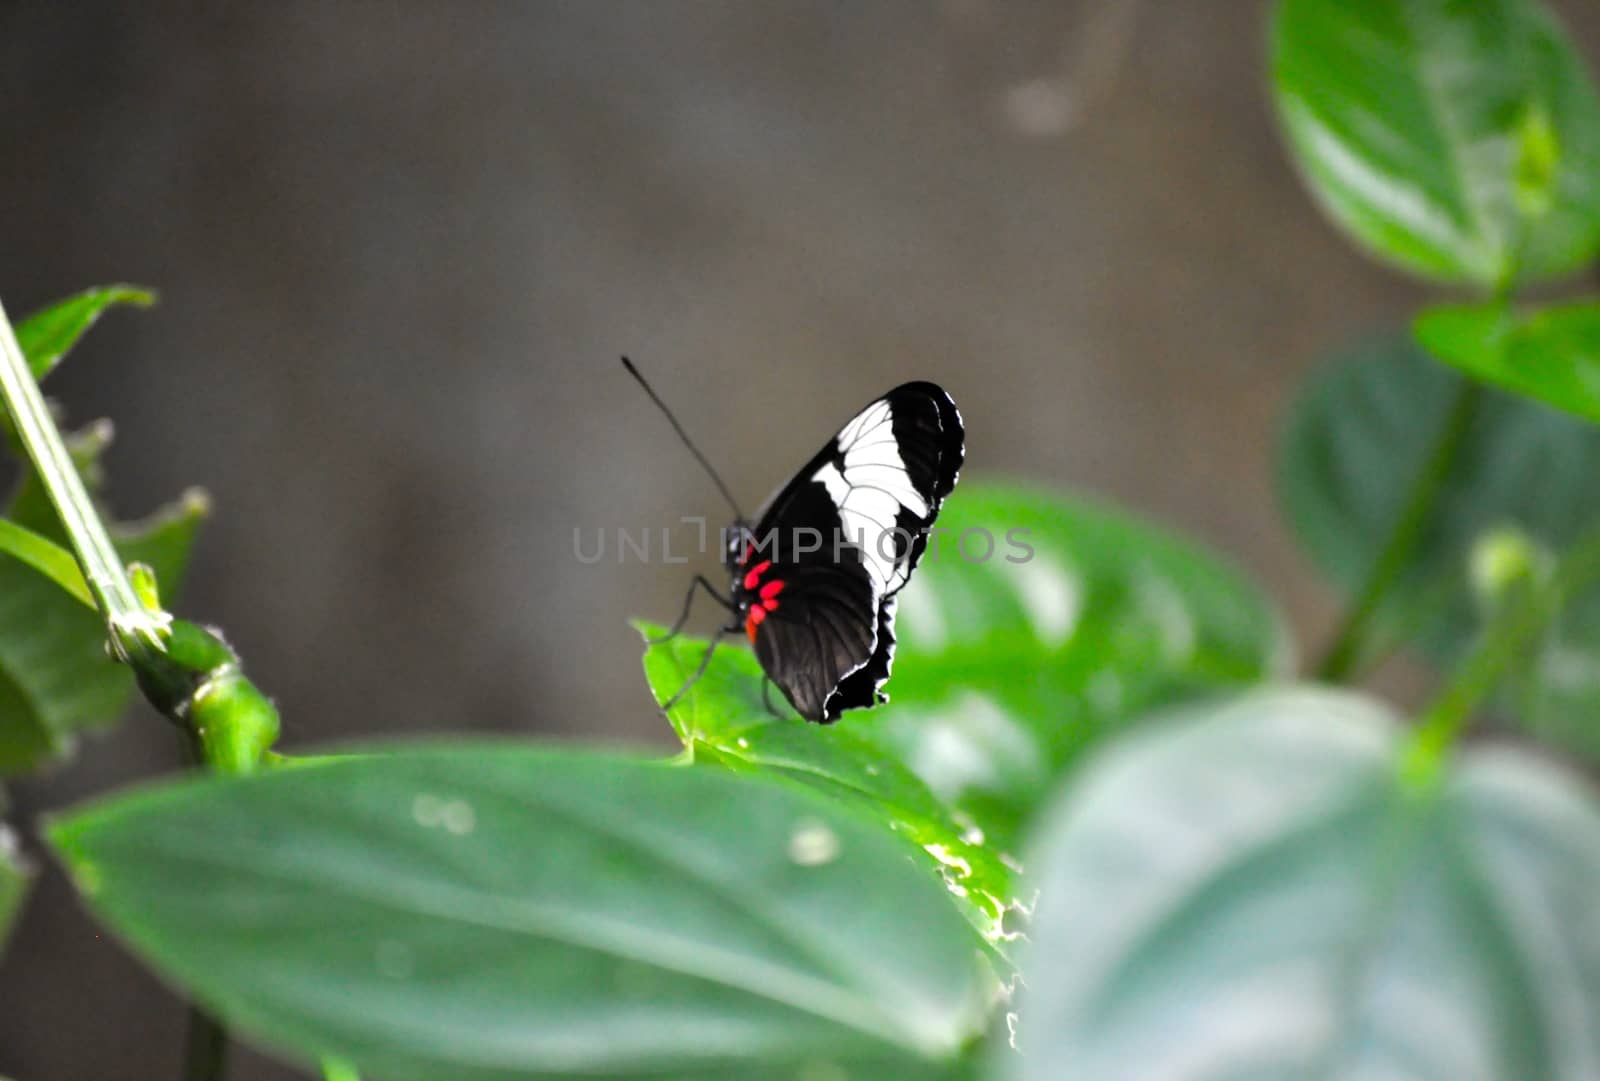 Butterfly on leaf by RefocusPhoto